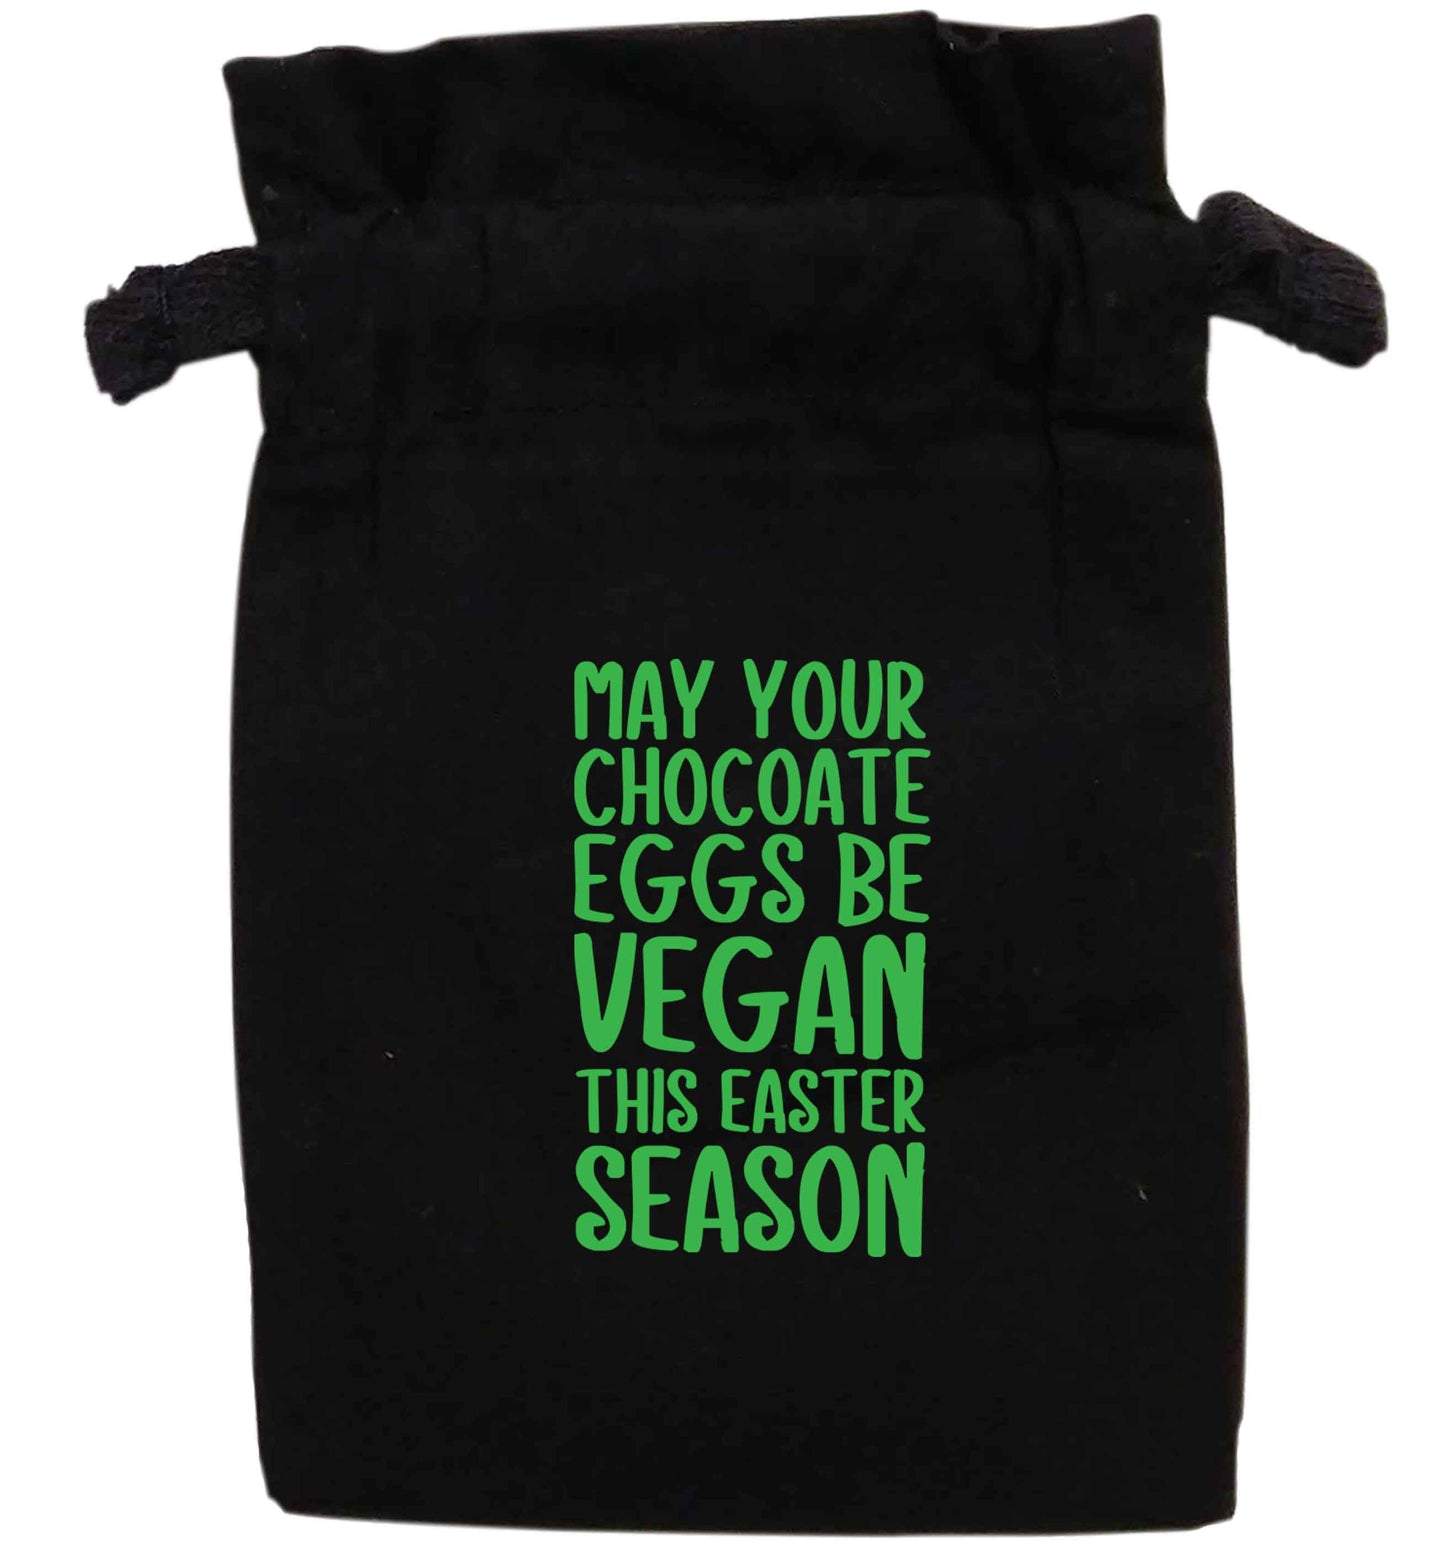 May your chocolate eggs be vegan this Easter season | XS - L | Pouch / Drawstring bag / Sack | Organic Cotton | Bulk discounts available!